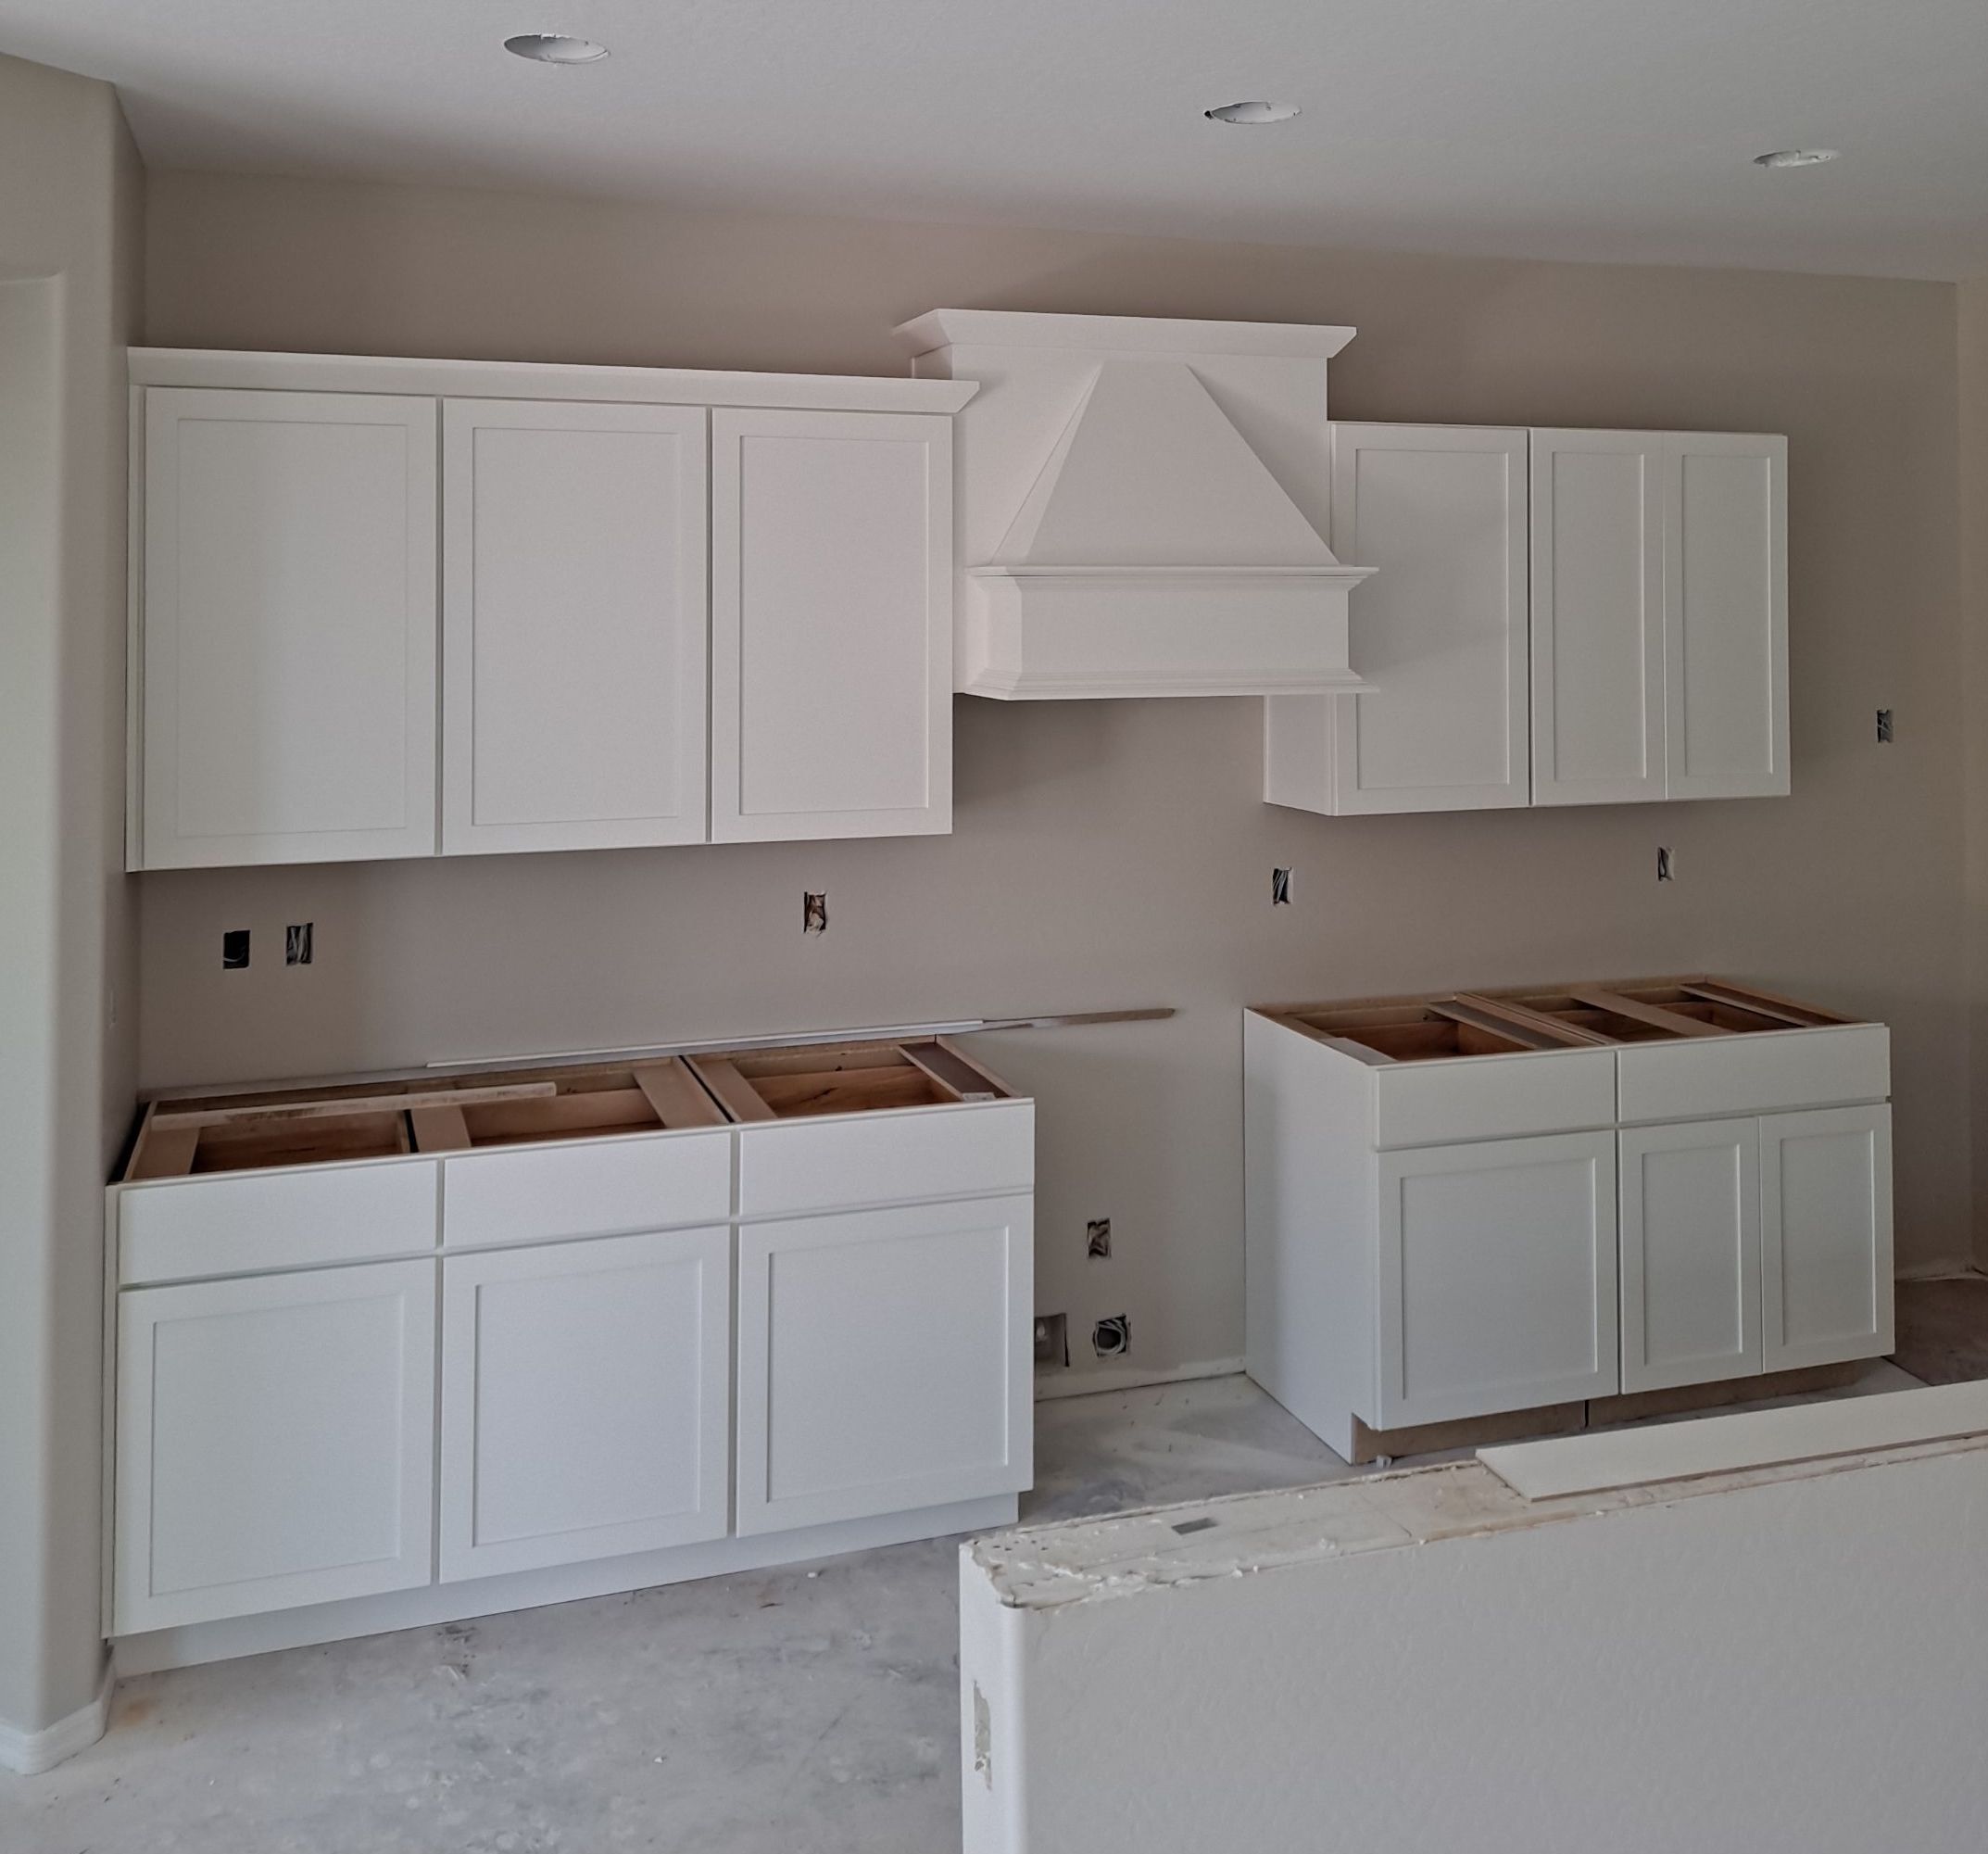 Kitchen being restored with new drywall and cabinetry